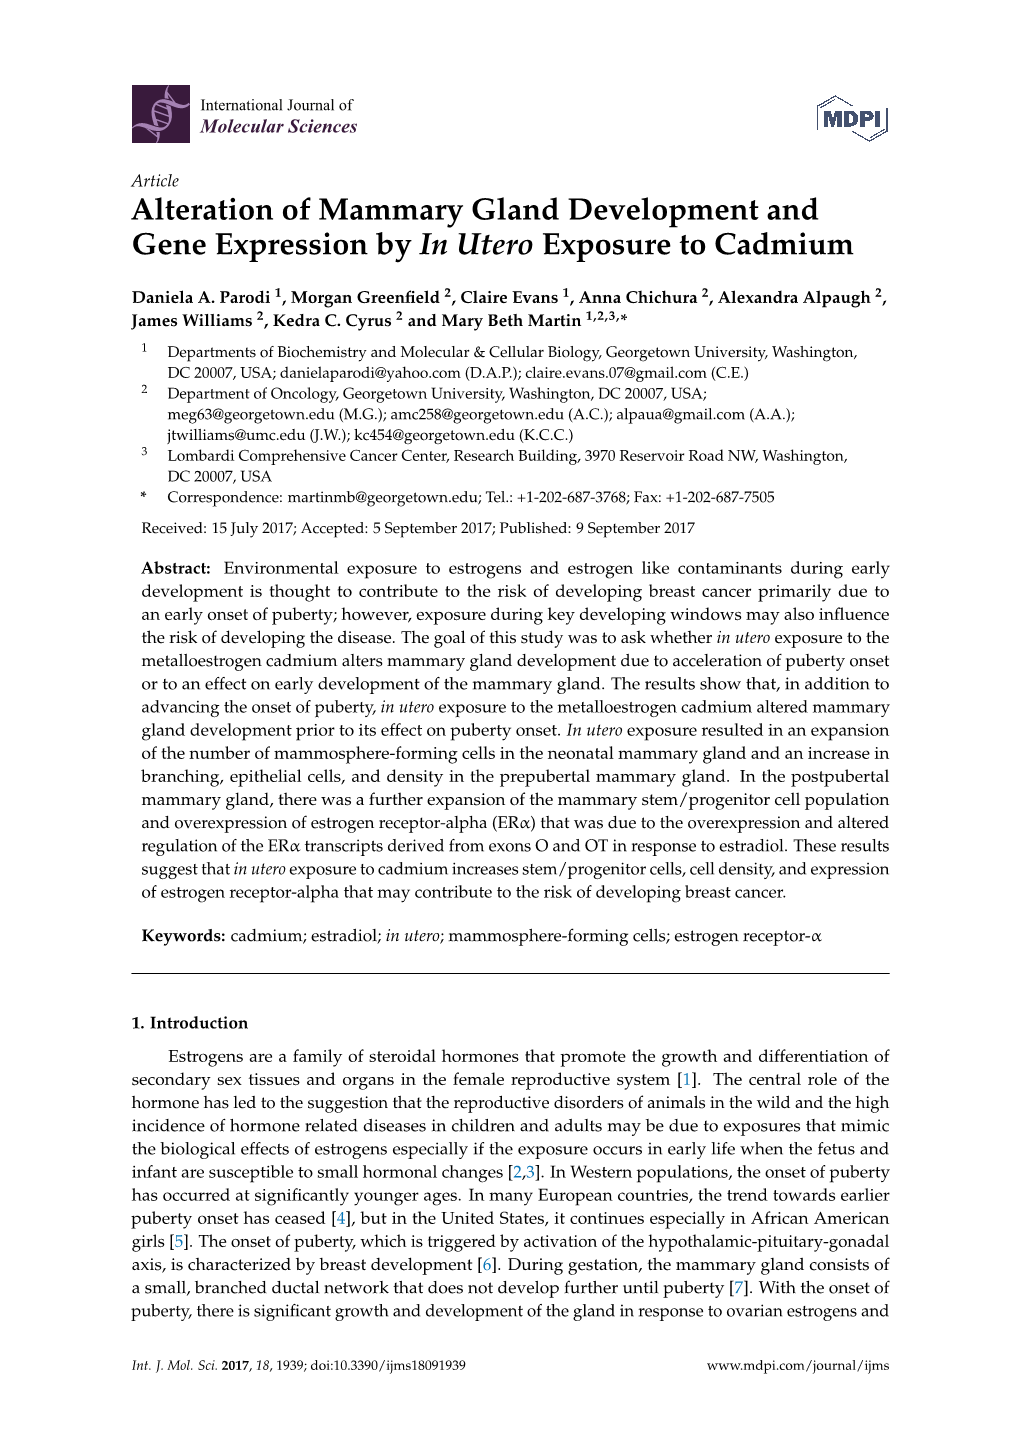 Alteration of Mammary Gland Development and Gene Expression by in Utero Exposure to Cadmium